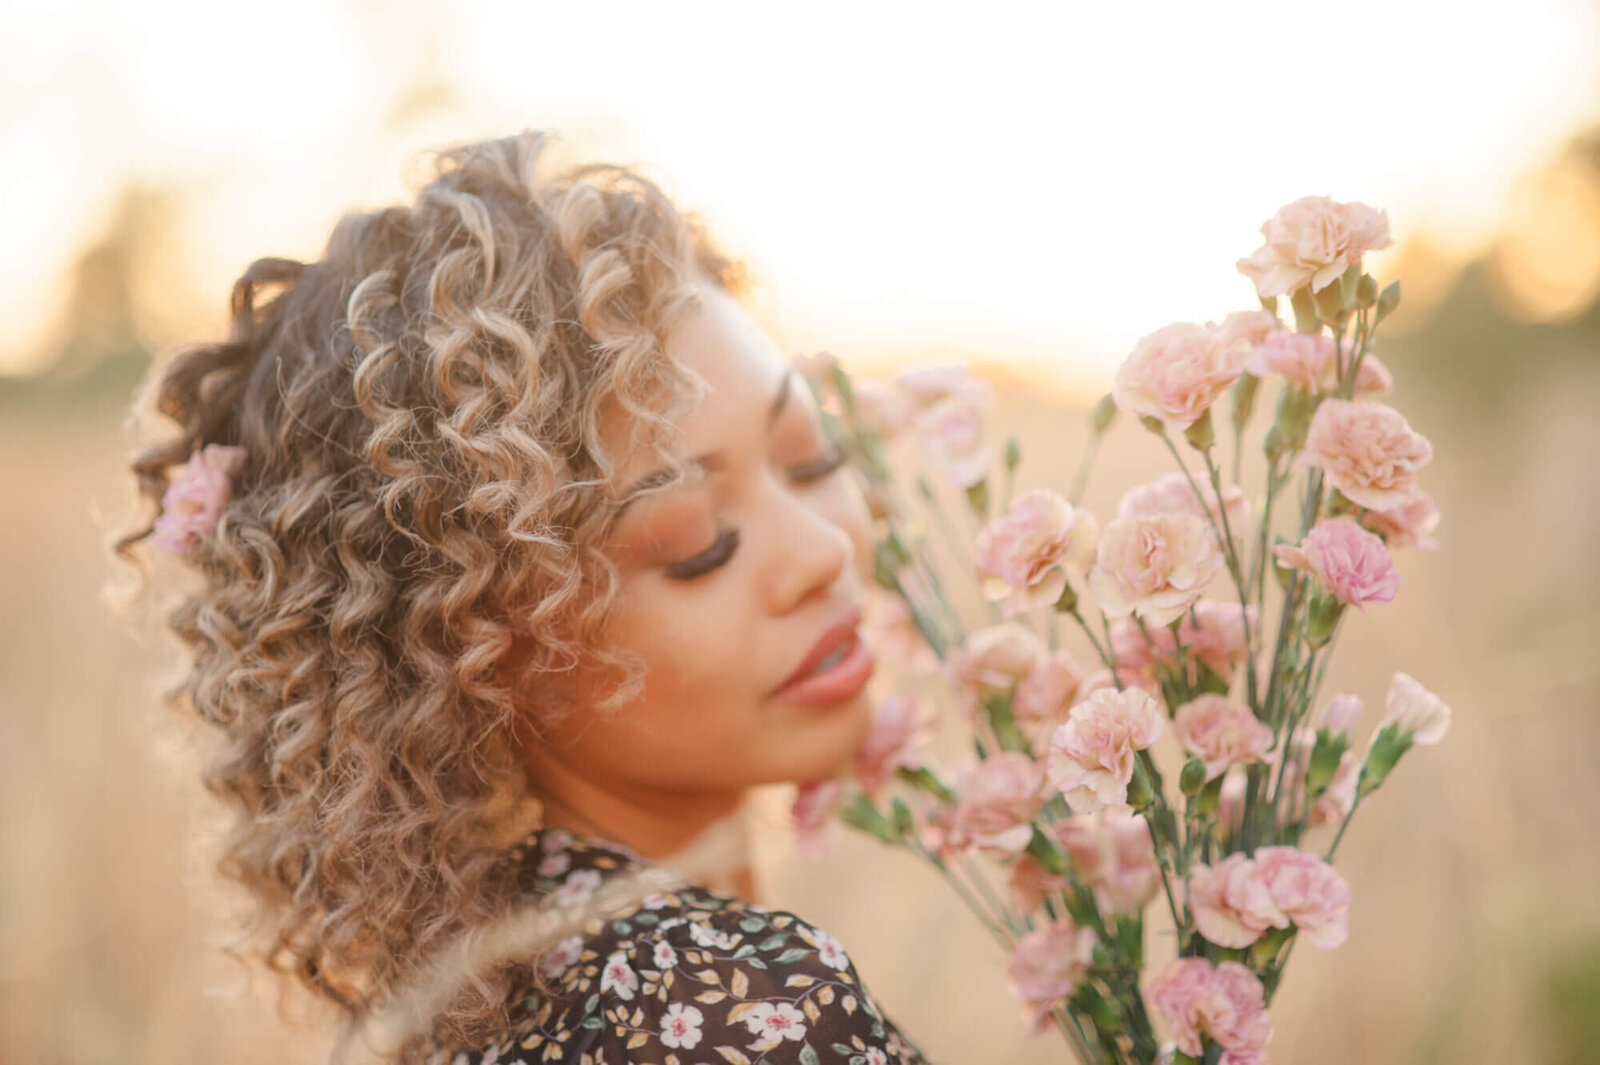 Senior girl holding pink florals with beautiful curly hair at sunset